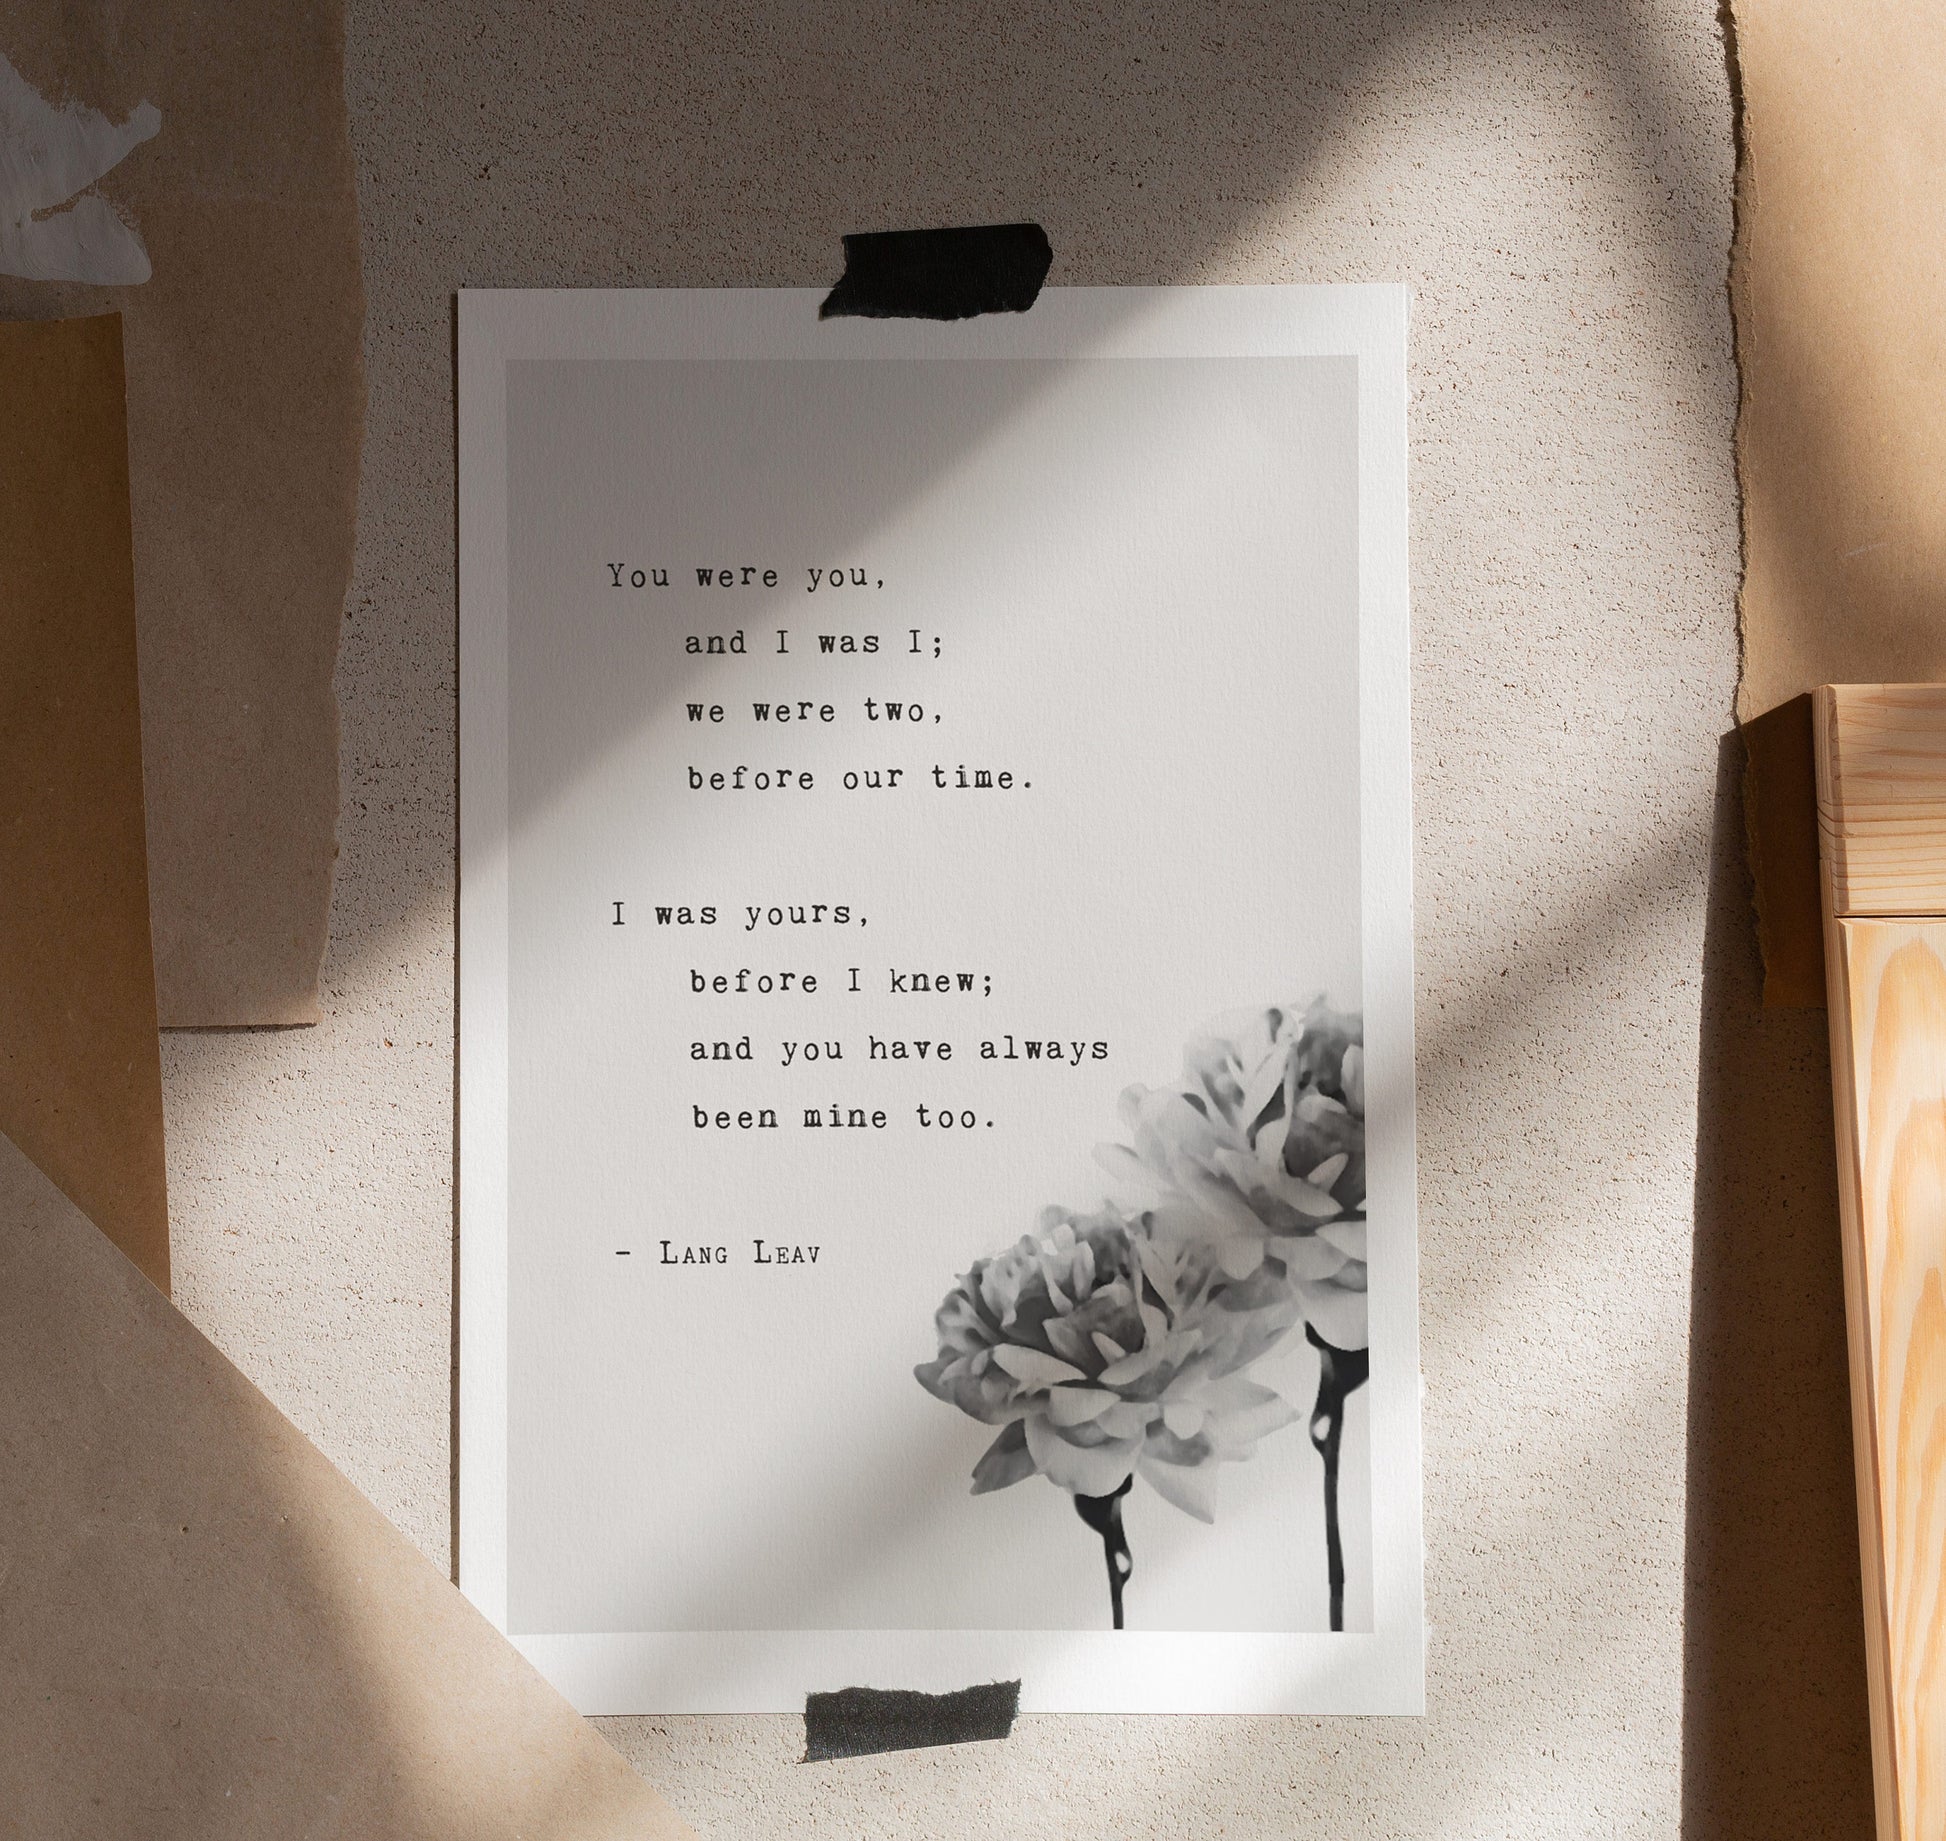 Wall art featuring words by Lang Leav